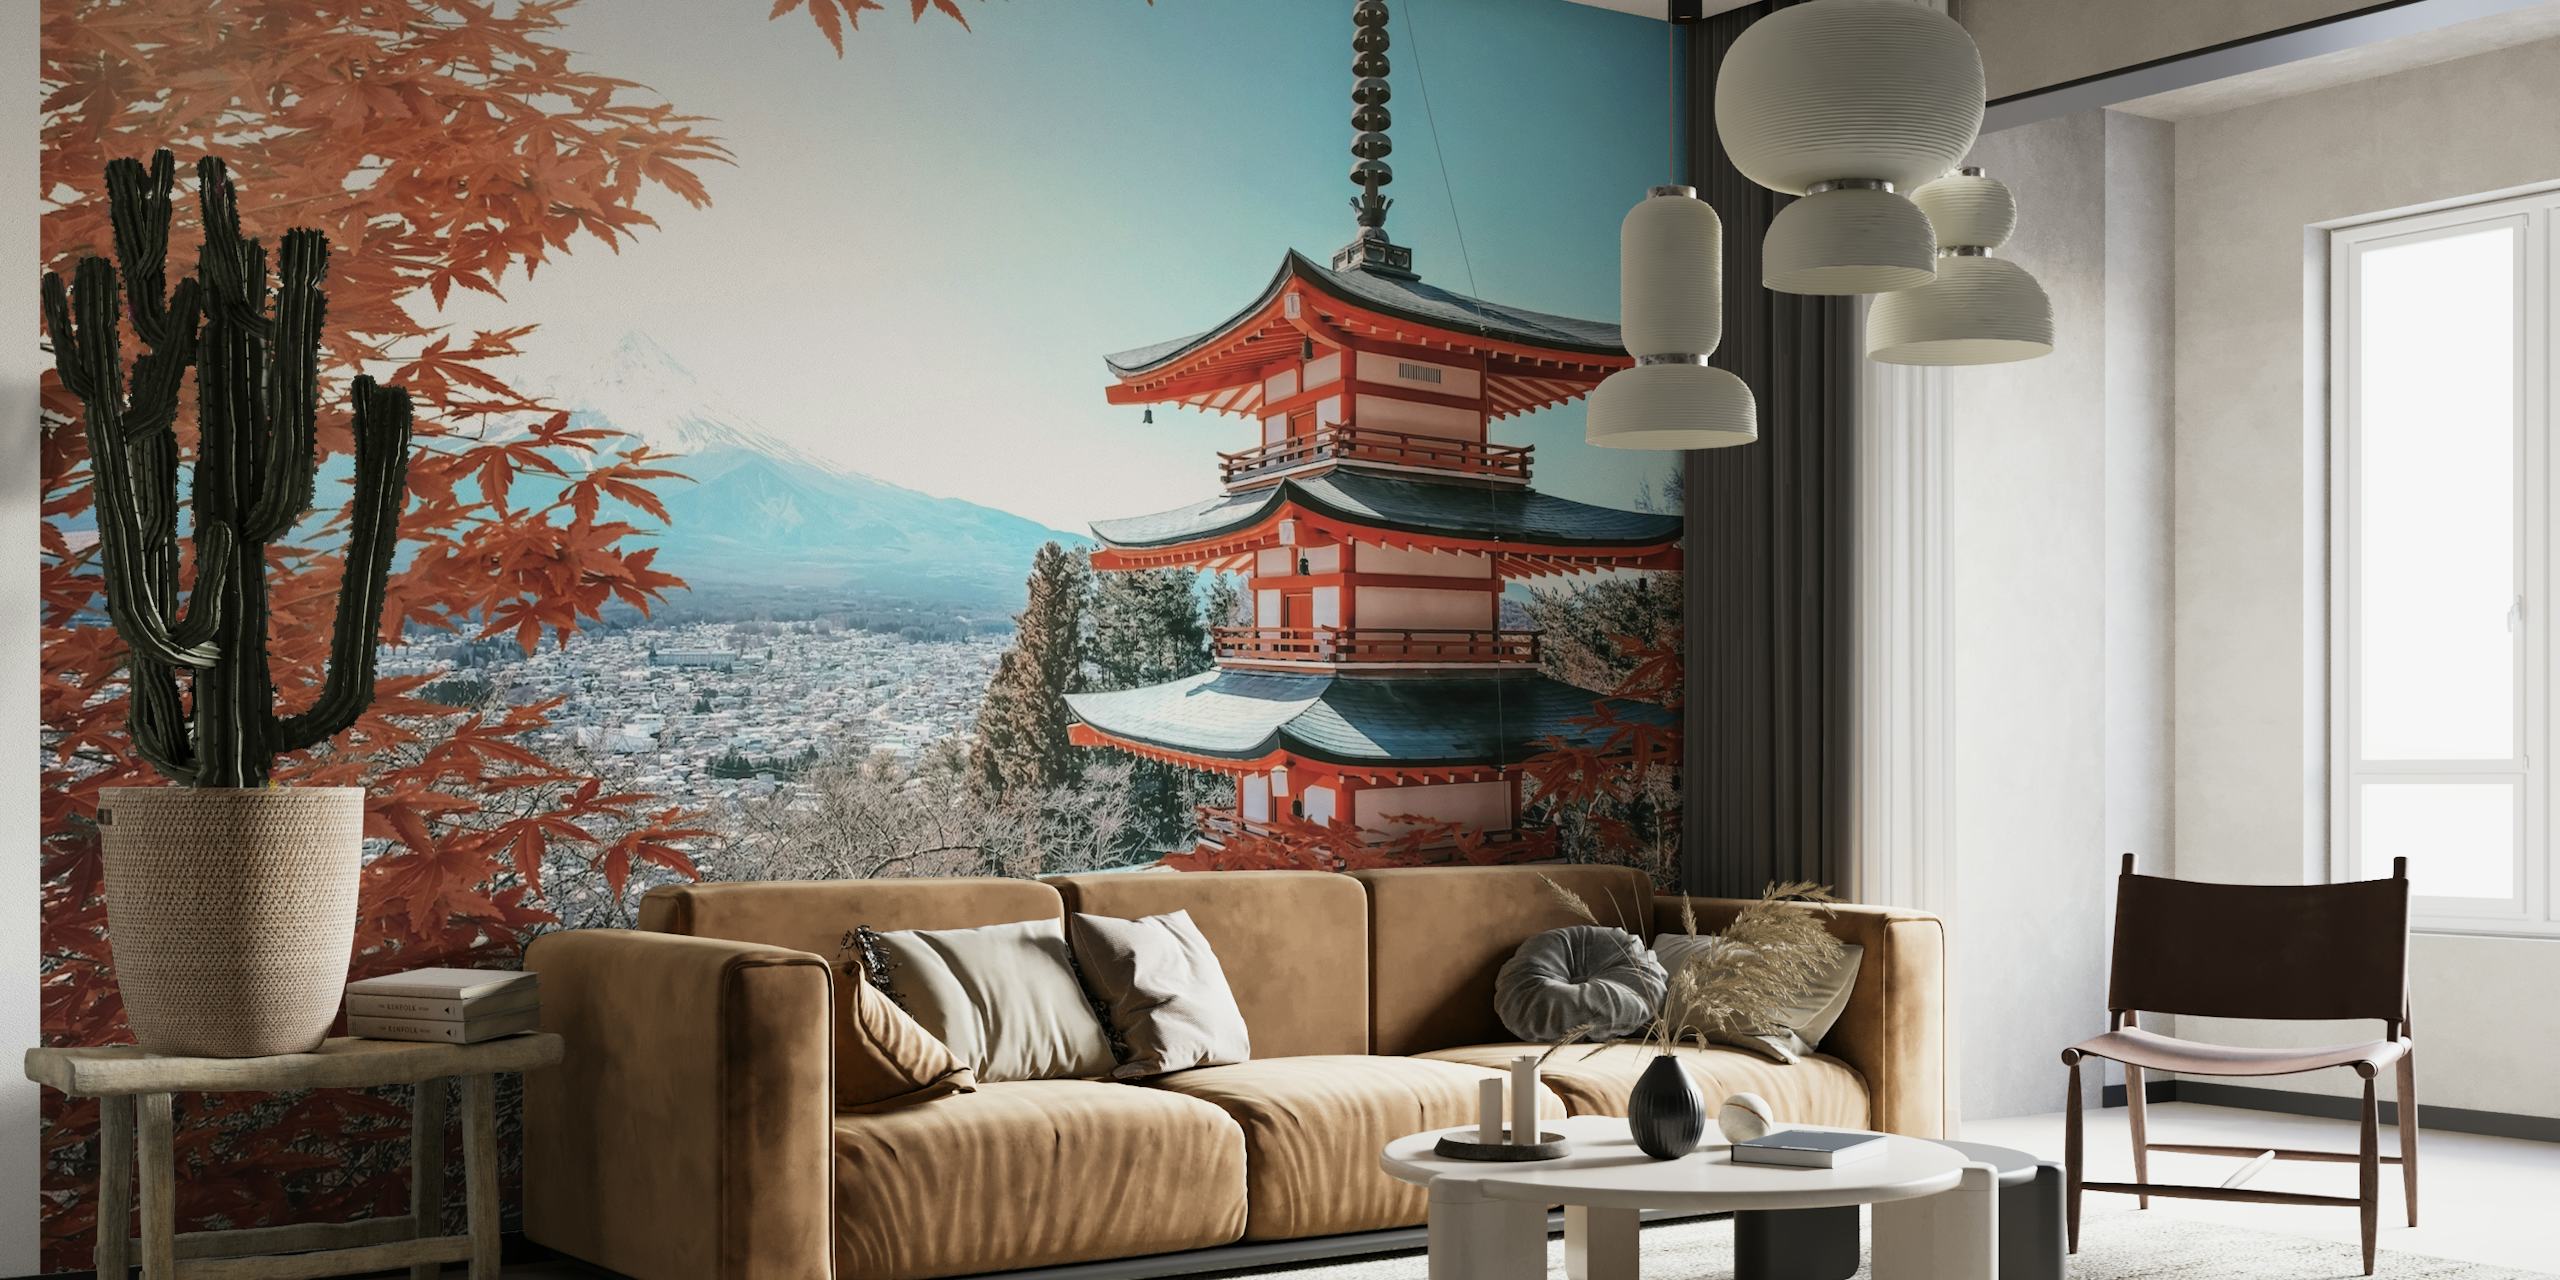 Chureito Pagoda wall mural with autumn leaves and Mount Fuji